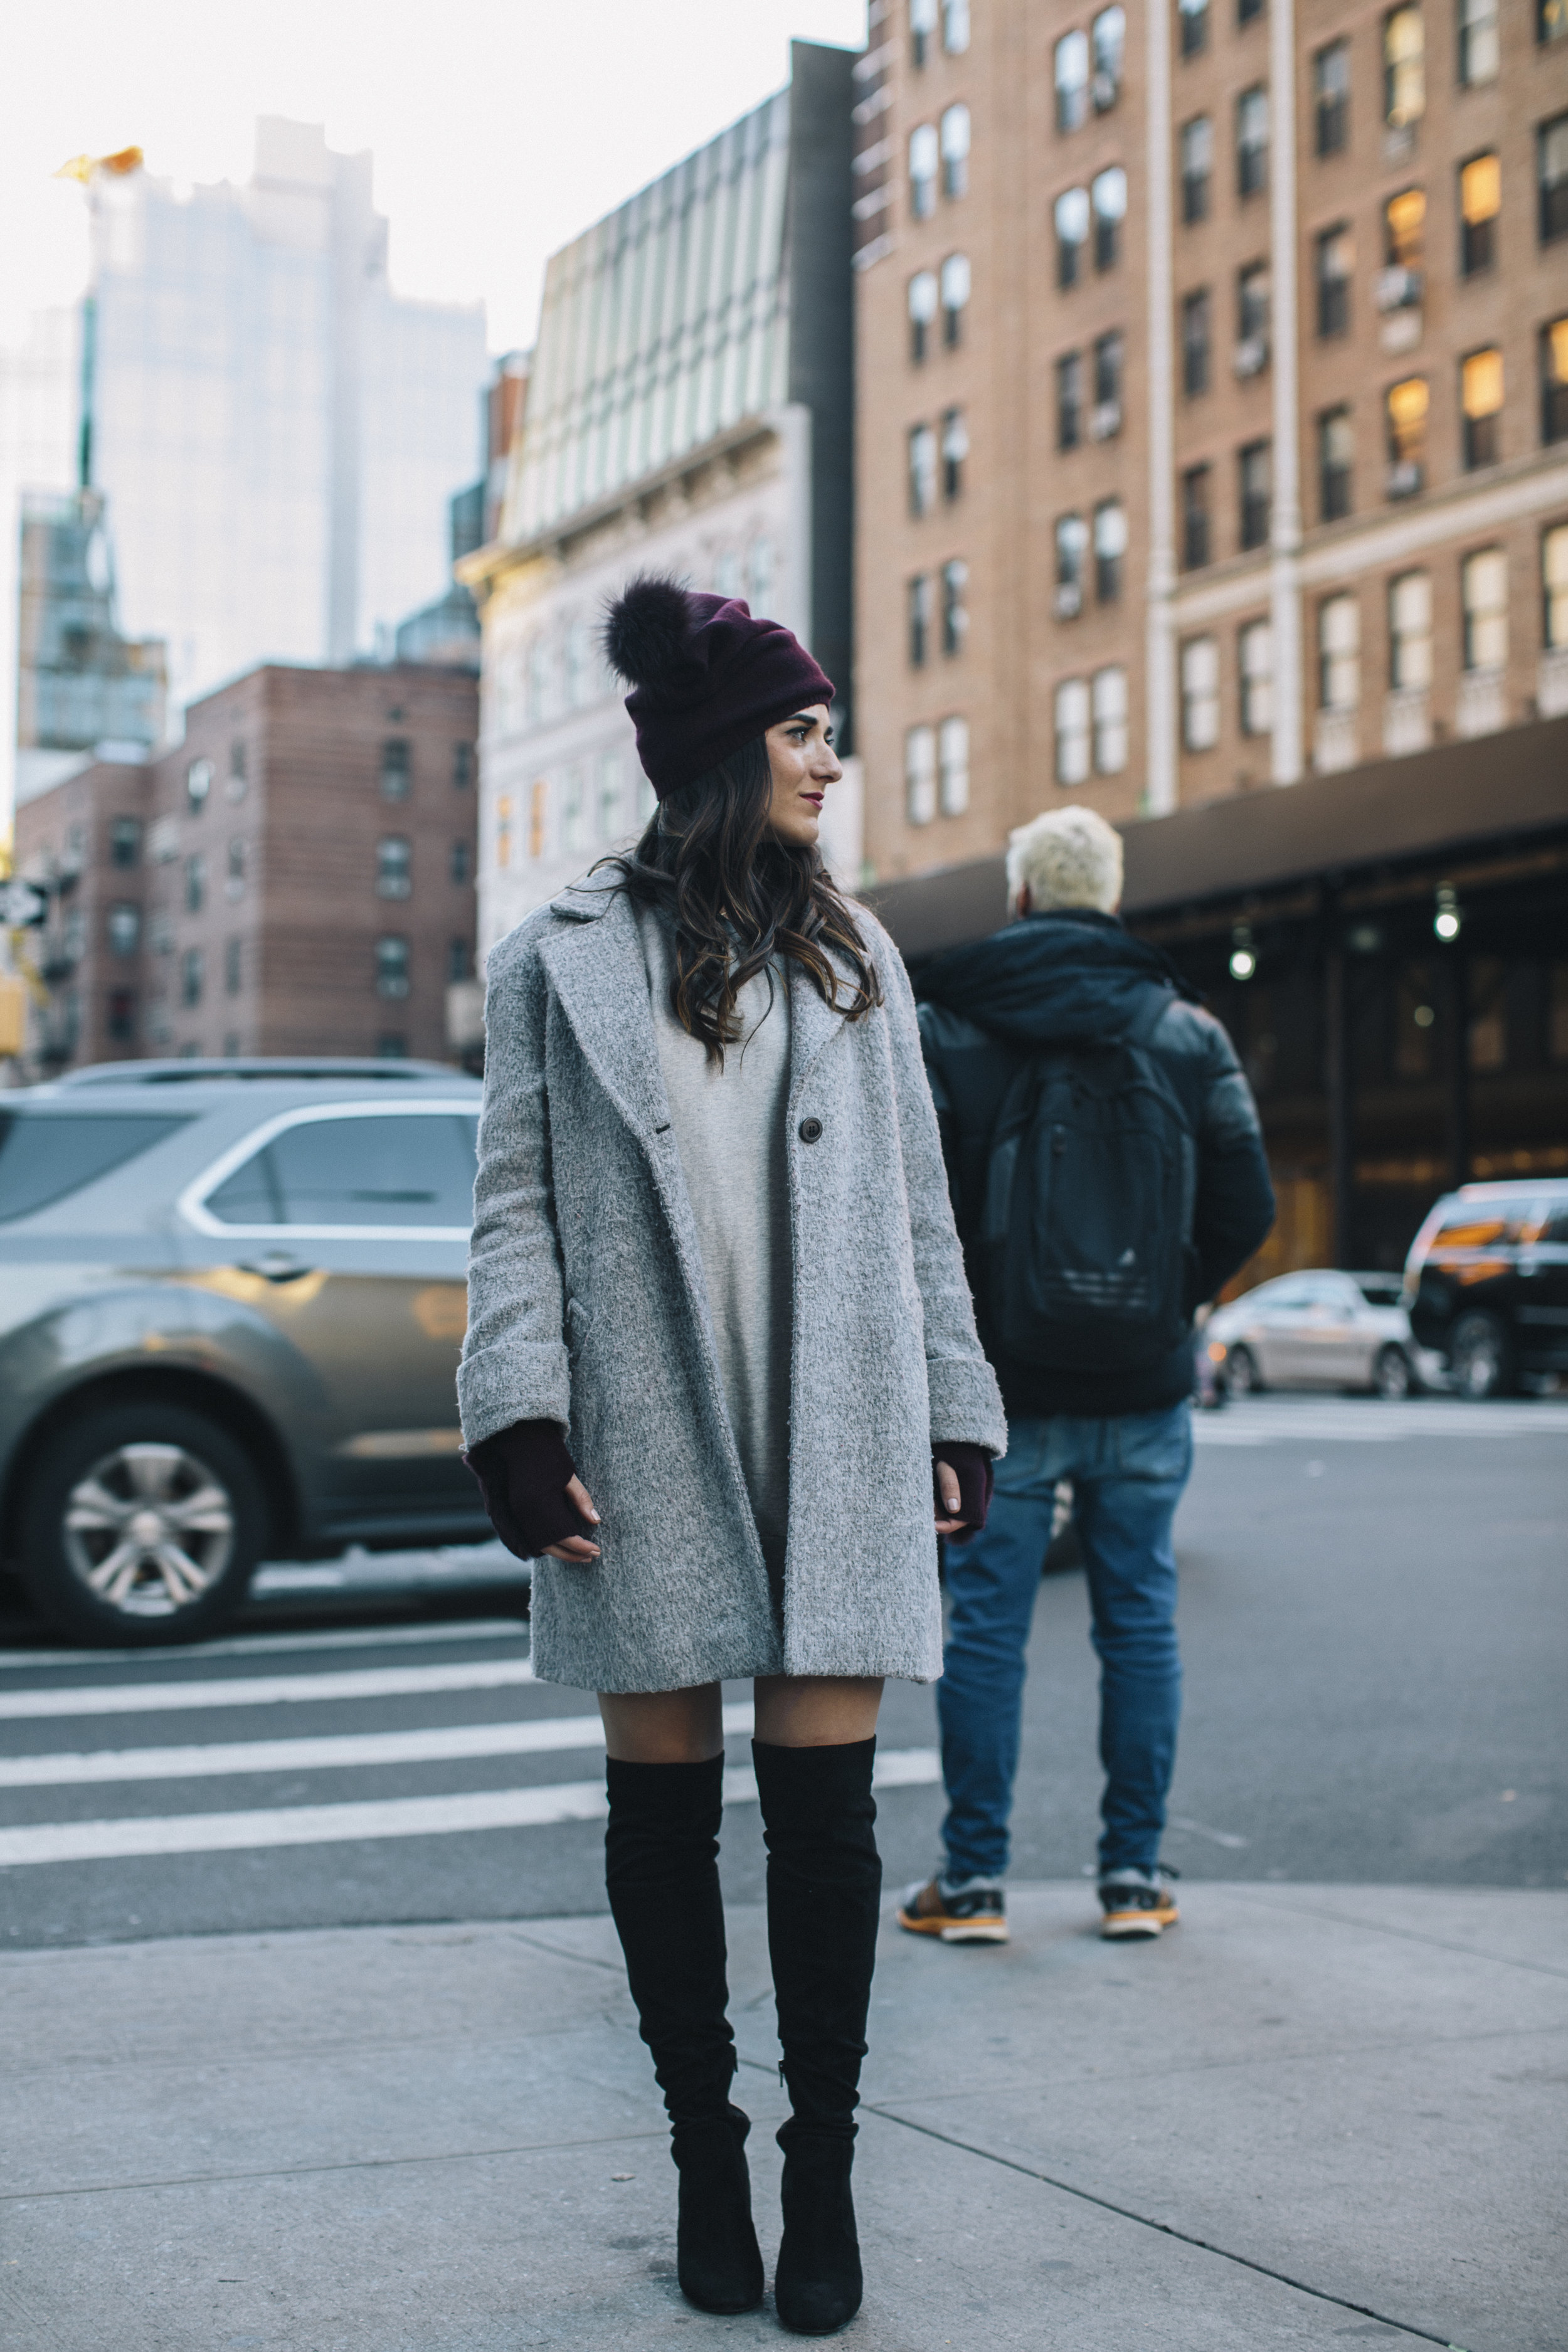 Cashmere Hat And Glove Set Piccolo New York Louboutins & Love Fashion Blog Esther Santer NYC Street Style Blogger Outfit OOTD Trendy Winter Wear Cold Weather Online Shopping Holiday Season Grey Coat Zara Sweatshirt Dress OTK Black Boots Stylish Cozy.jpg